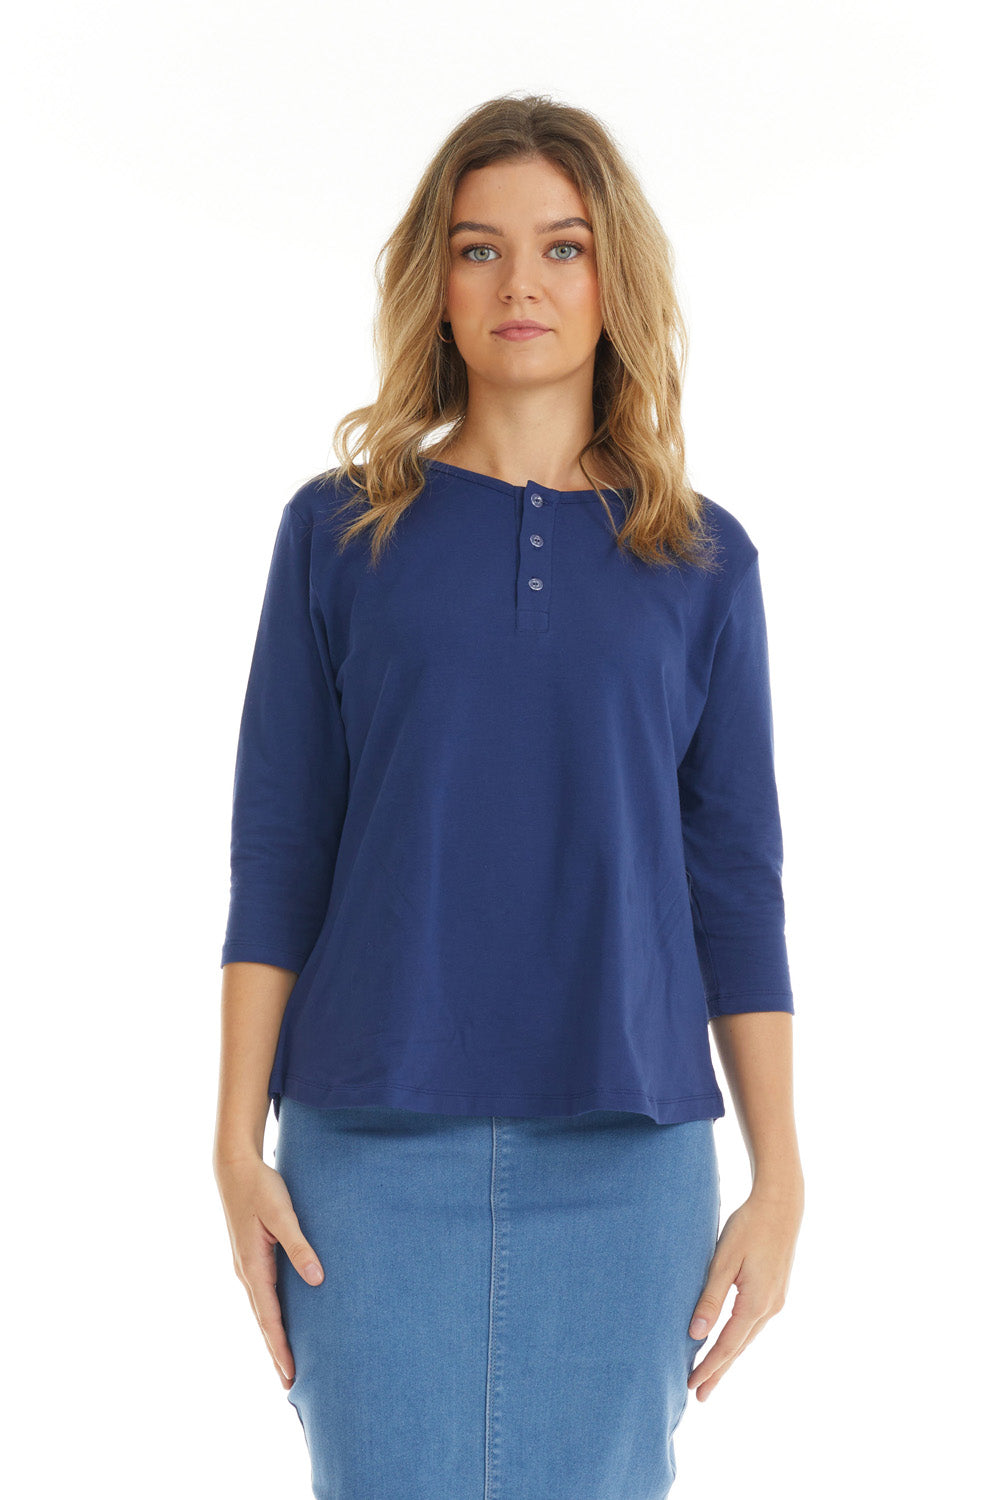 Navy Blue 3/4 Sleeve Cotton Henley Top for Women